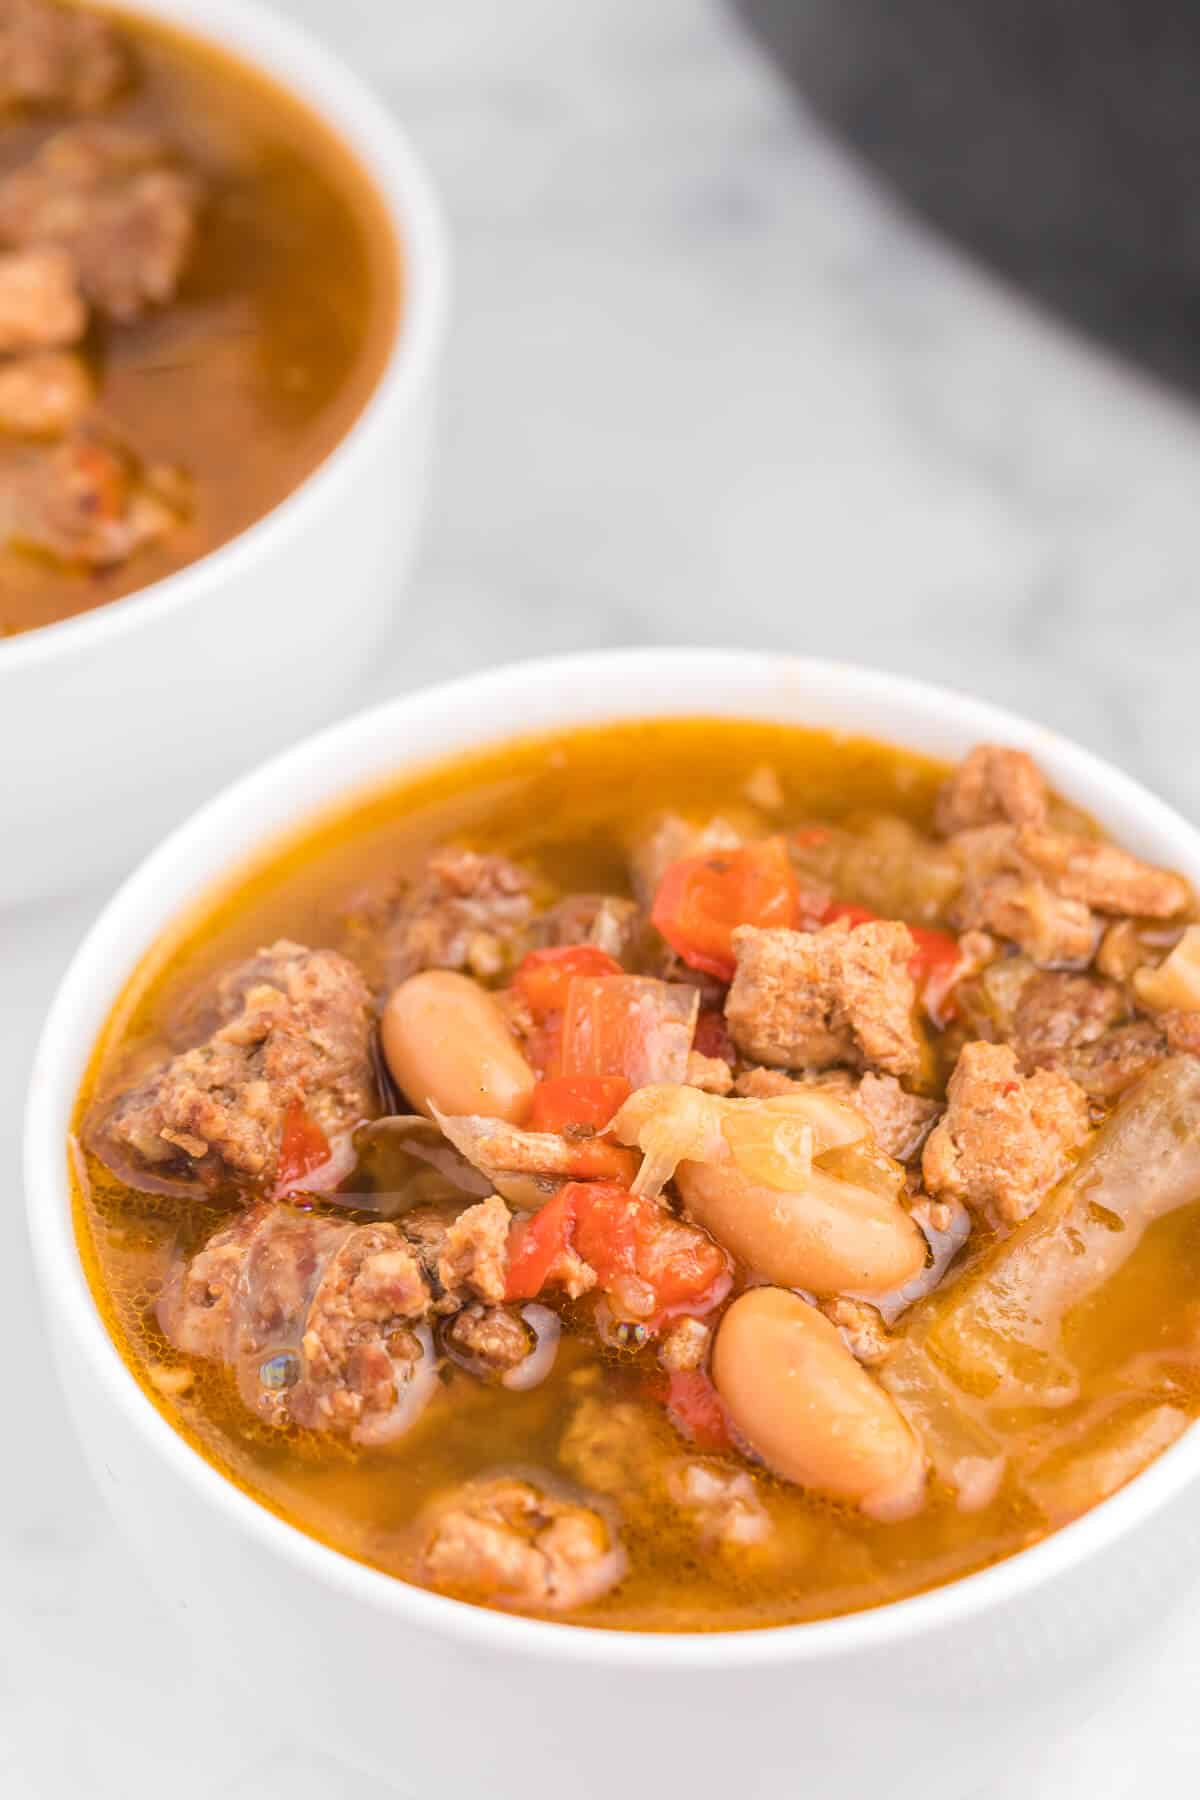 Chicken Sausage Soup - The most comforting winter soup! Load up the slow cooker with ground chicken, beer and sliced Italian sausage in this broth-based soup.